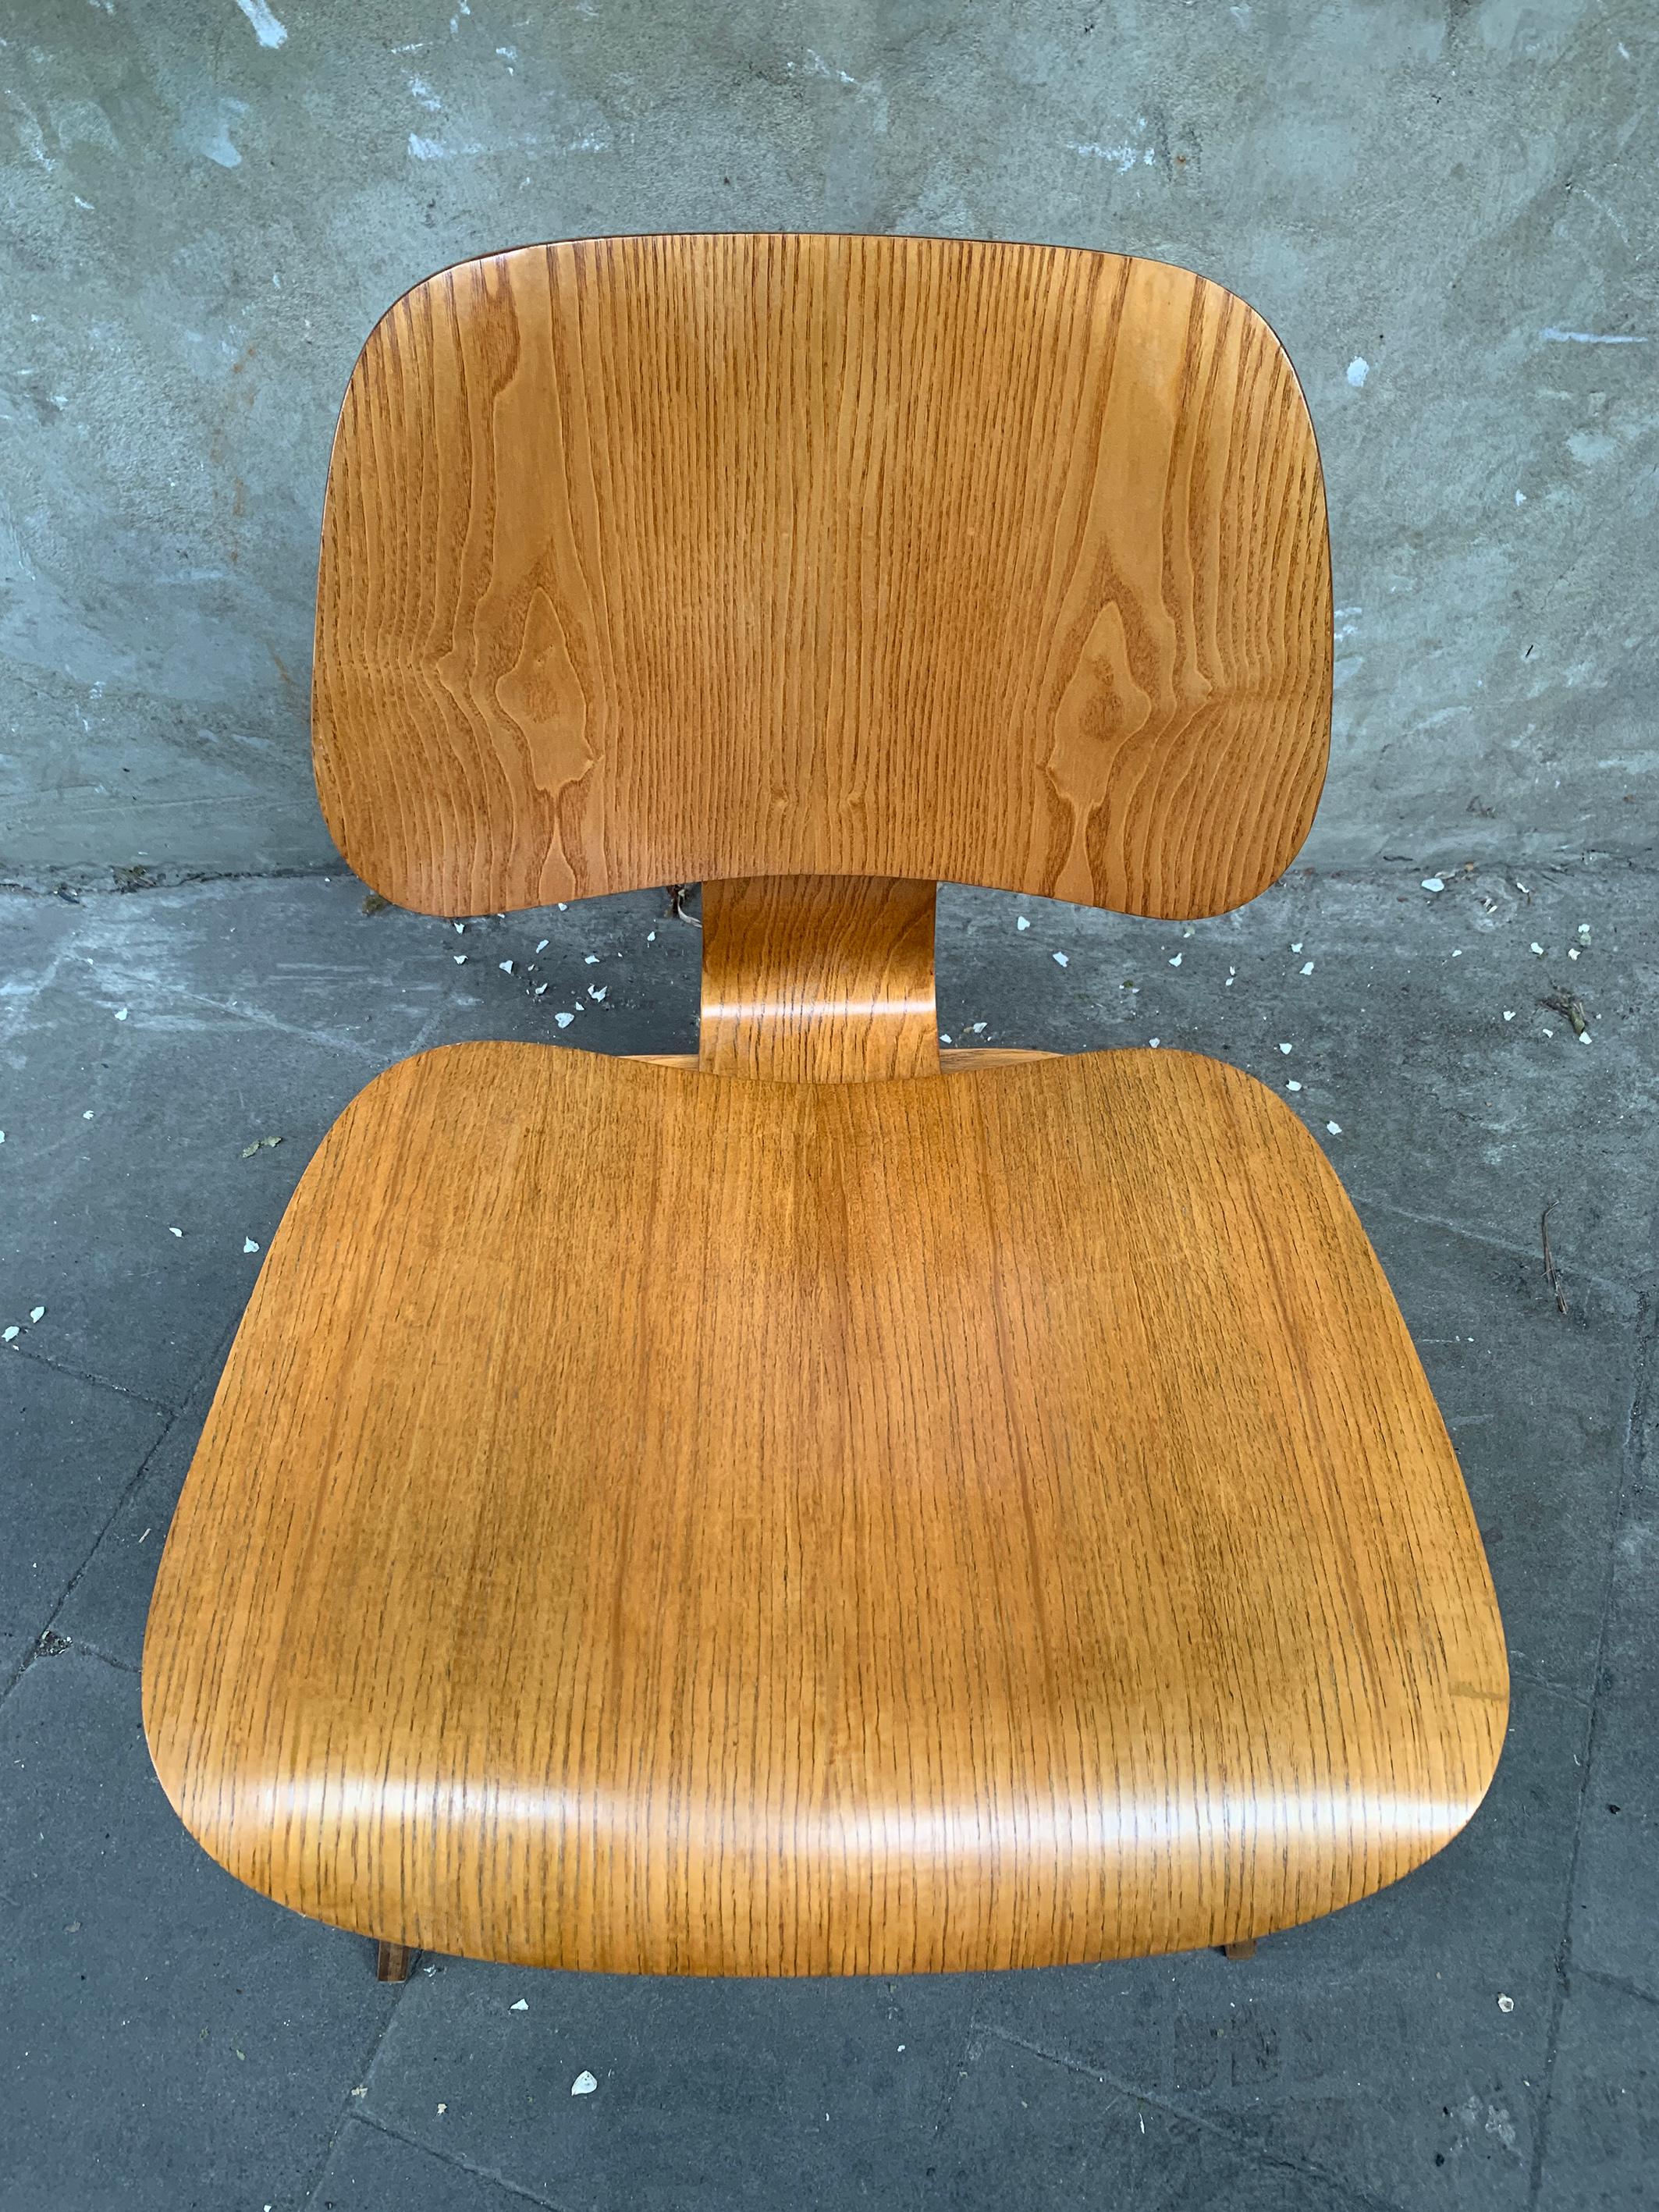 Veneer Early LCW Lounge Chair in Ash by Charles & Ray Eames, Herman Miller, 1950s